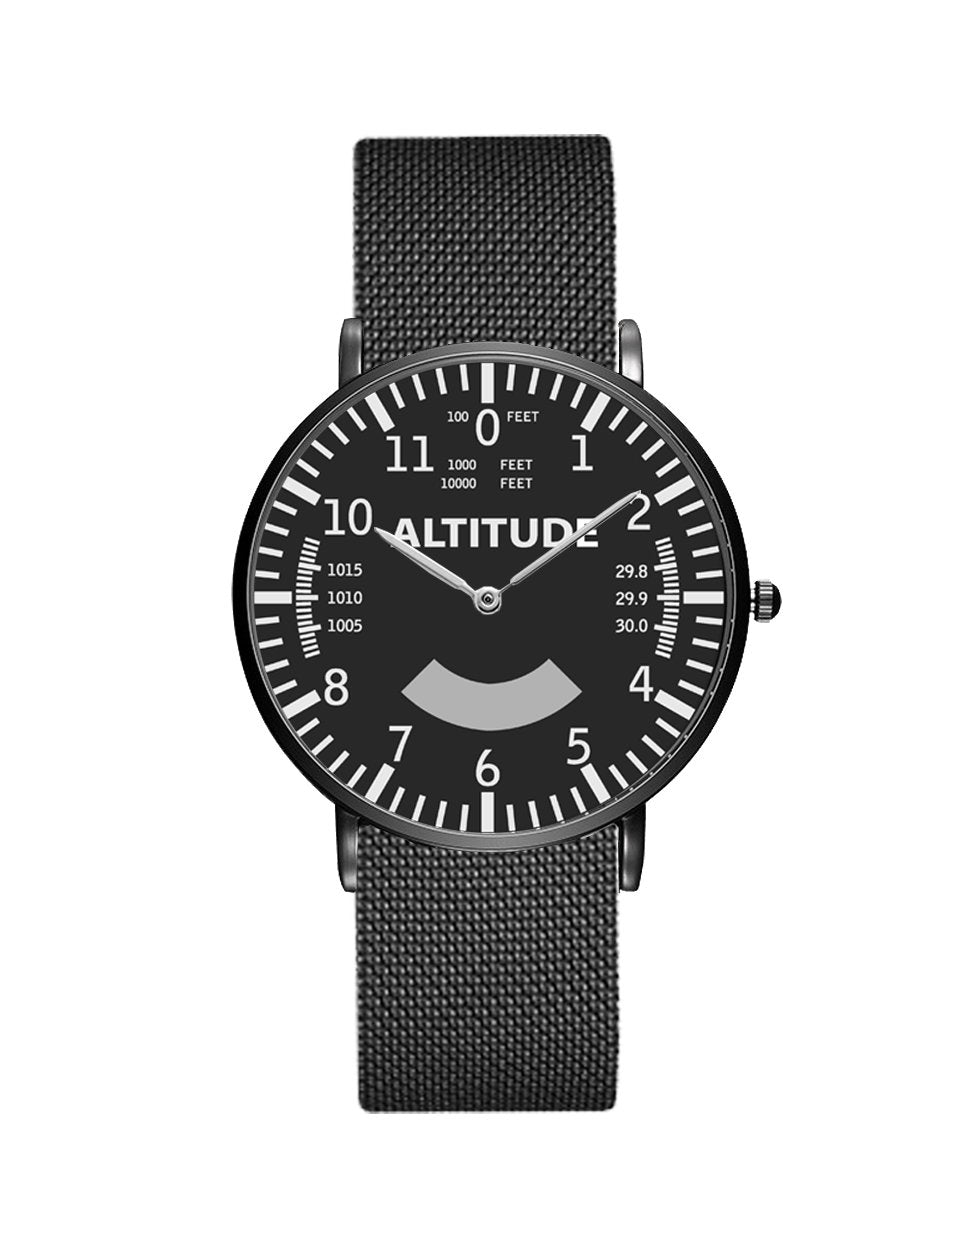 Airplane Instrument Series (Altitude) Stainless Steel Strap Watches Pilot Eyes Store Black & Stainless Steel Strap 